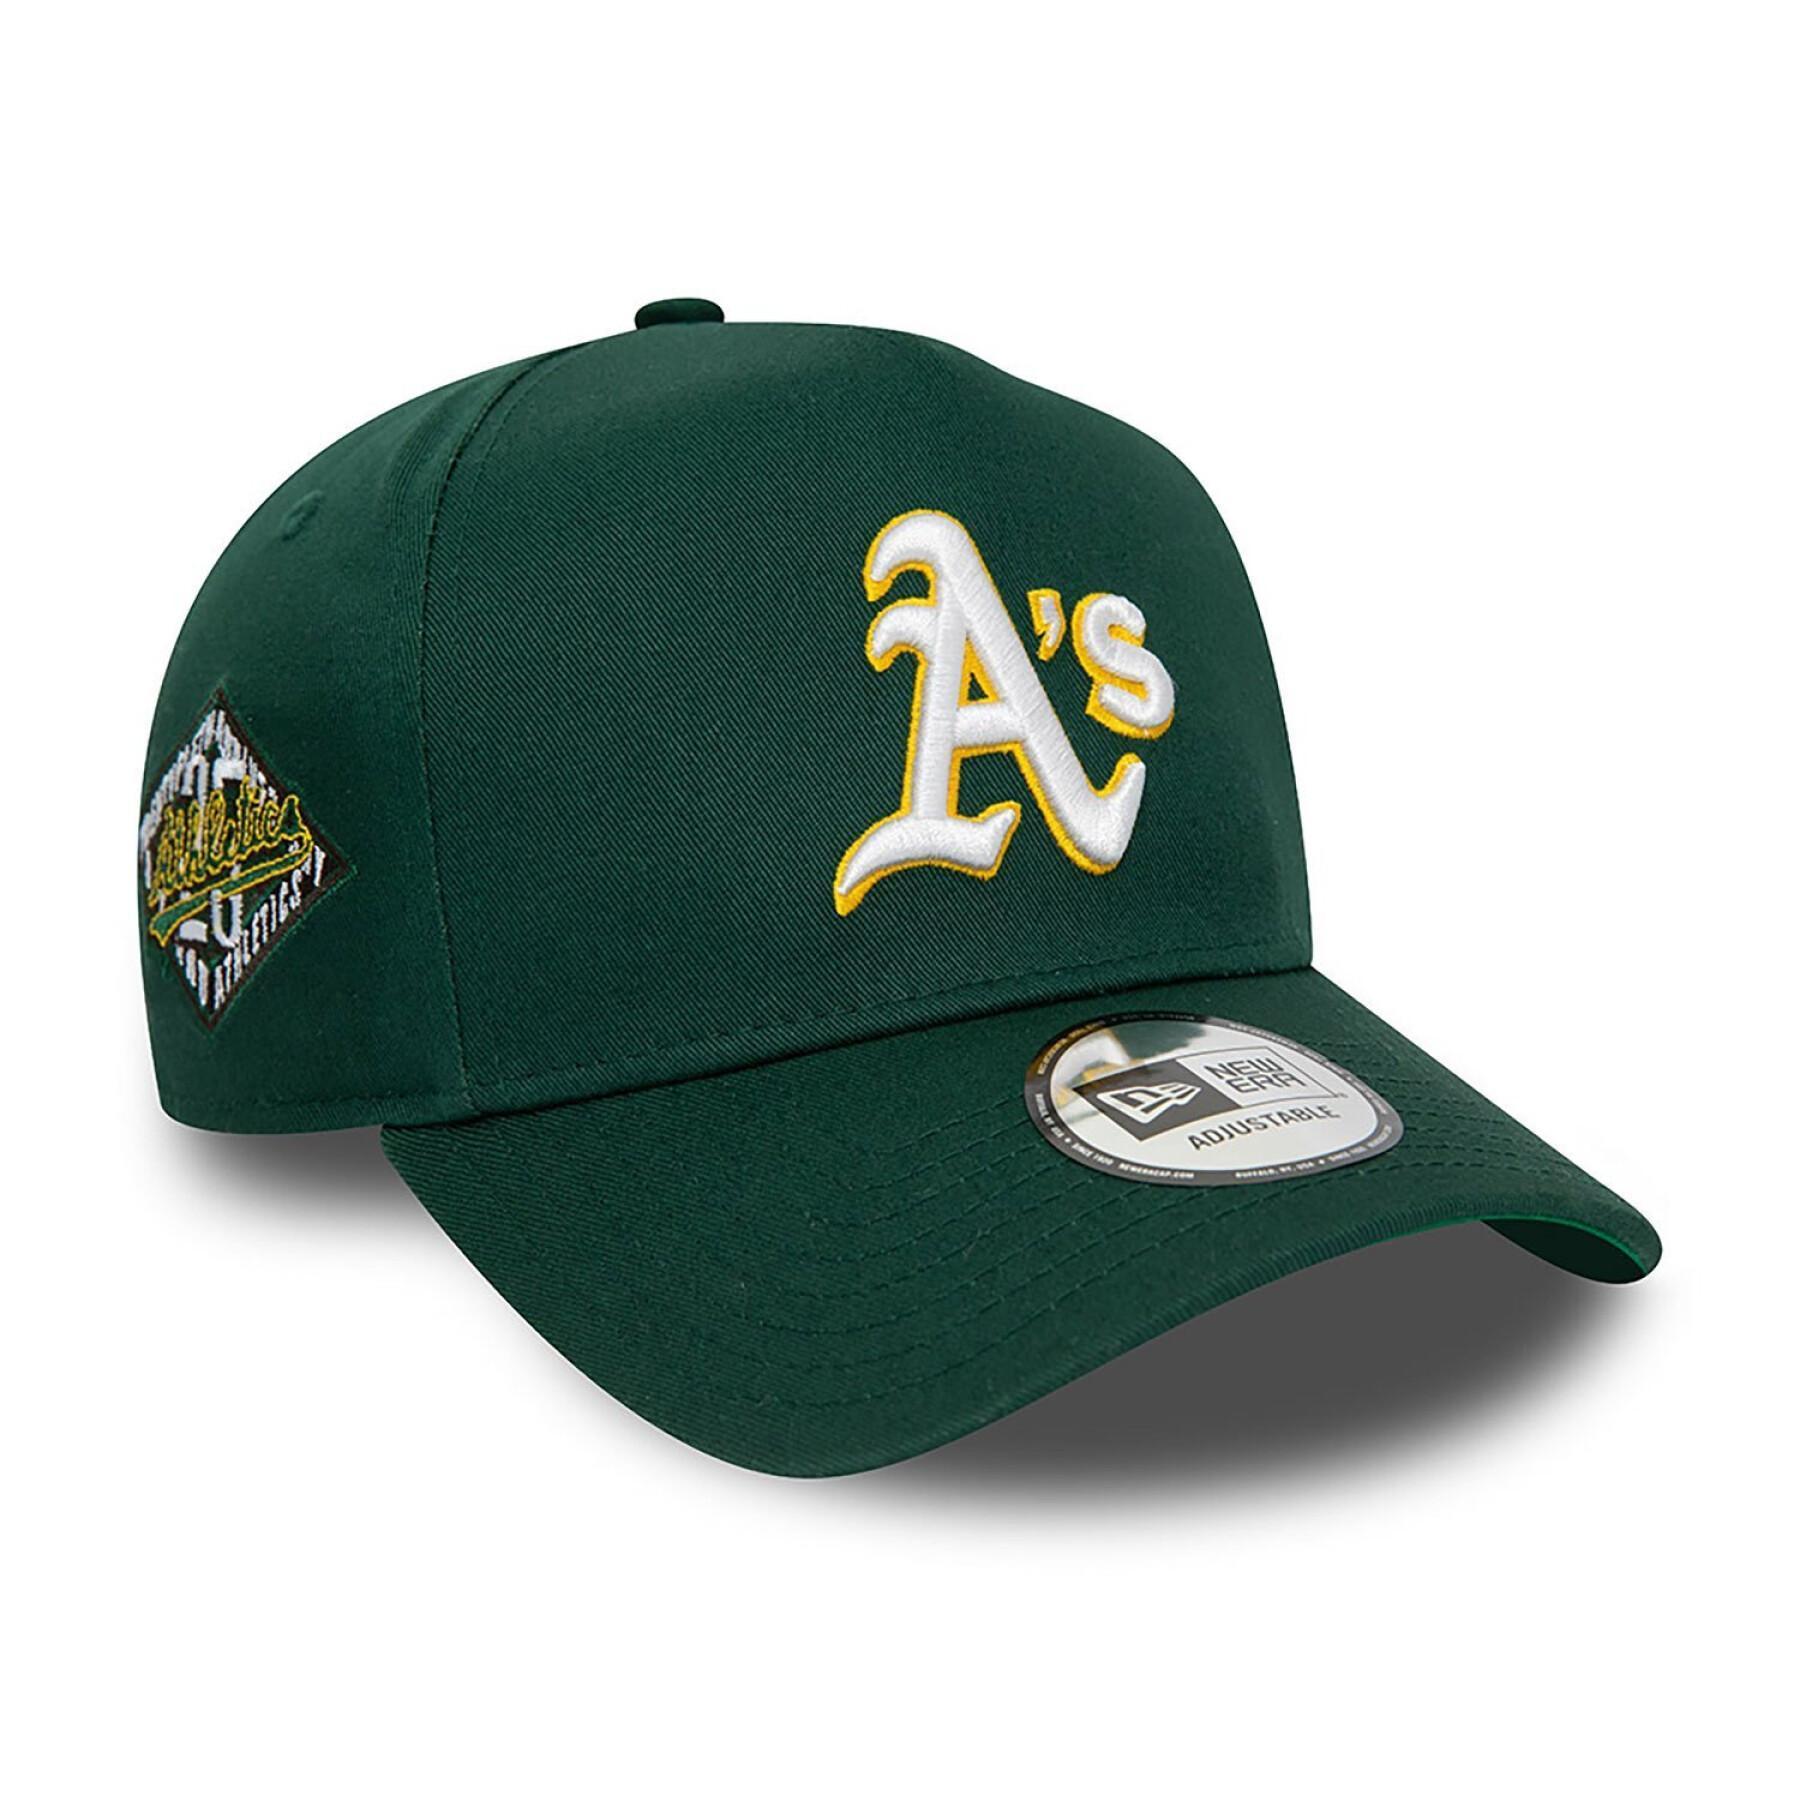 Gorra 9forty Oakland Athletics Patch